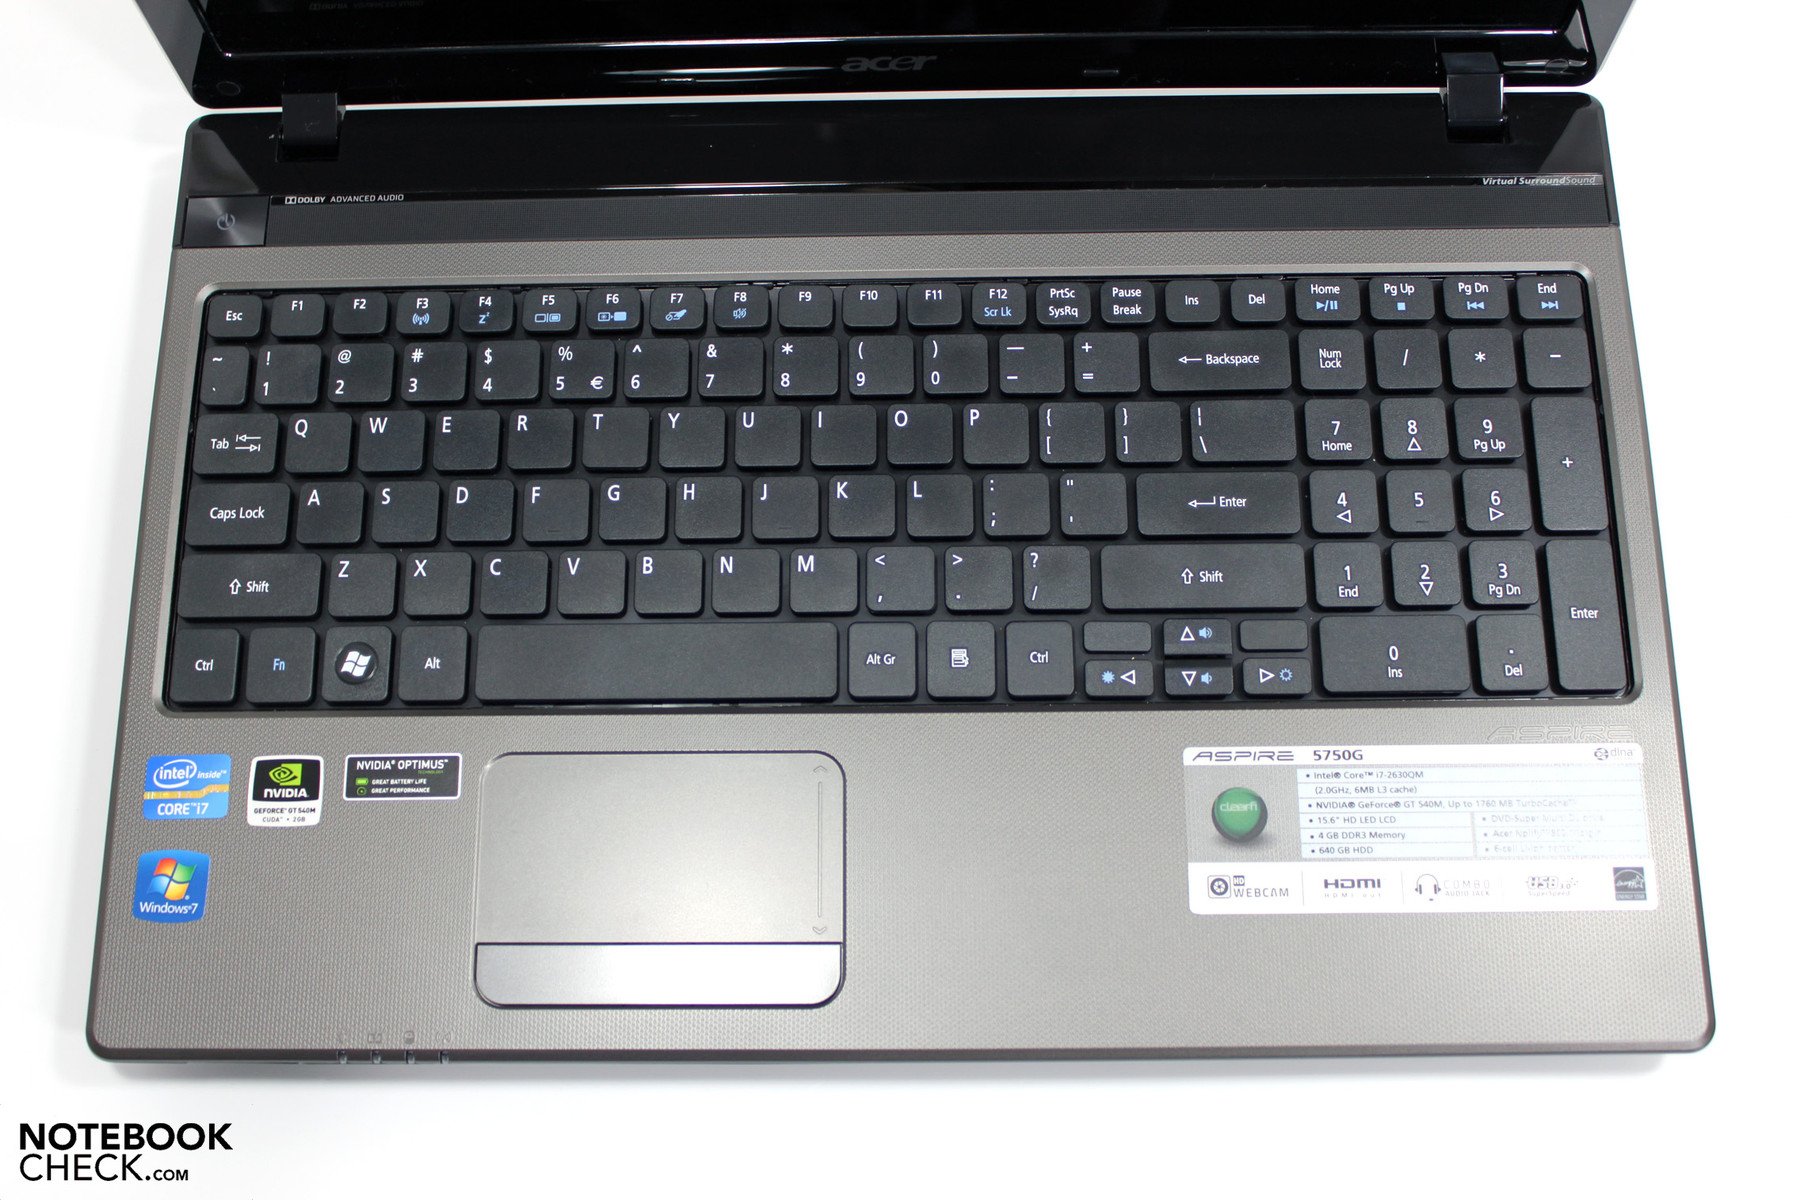 ACER ASPIRE 5750G WIFI WINDOWS 7 X64 DRIVER DOWNLOAD